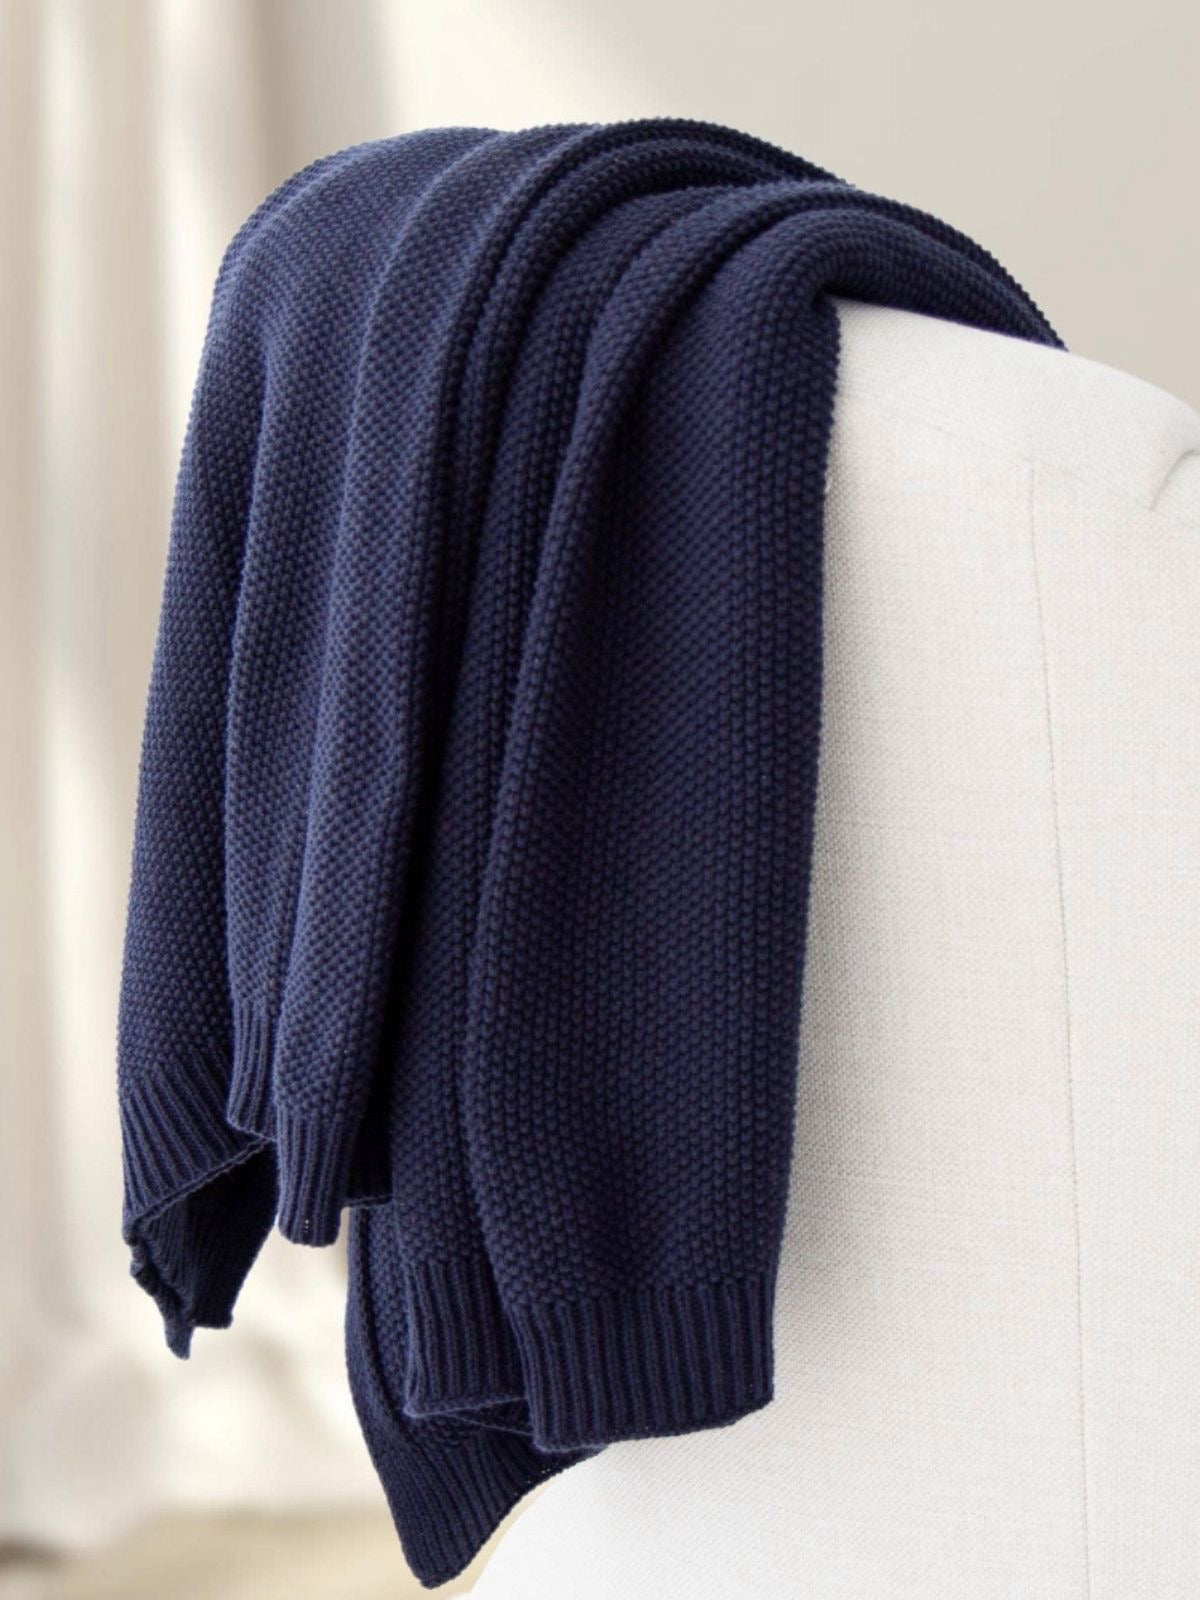 100% Cotton Seedstitch Knit Decorative Throw Blanket Available in Luxury Navy Color Sold by KYA Home Decor, 50W x 60L. 